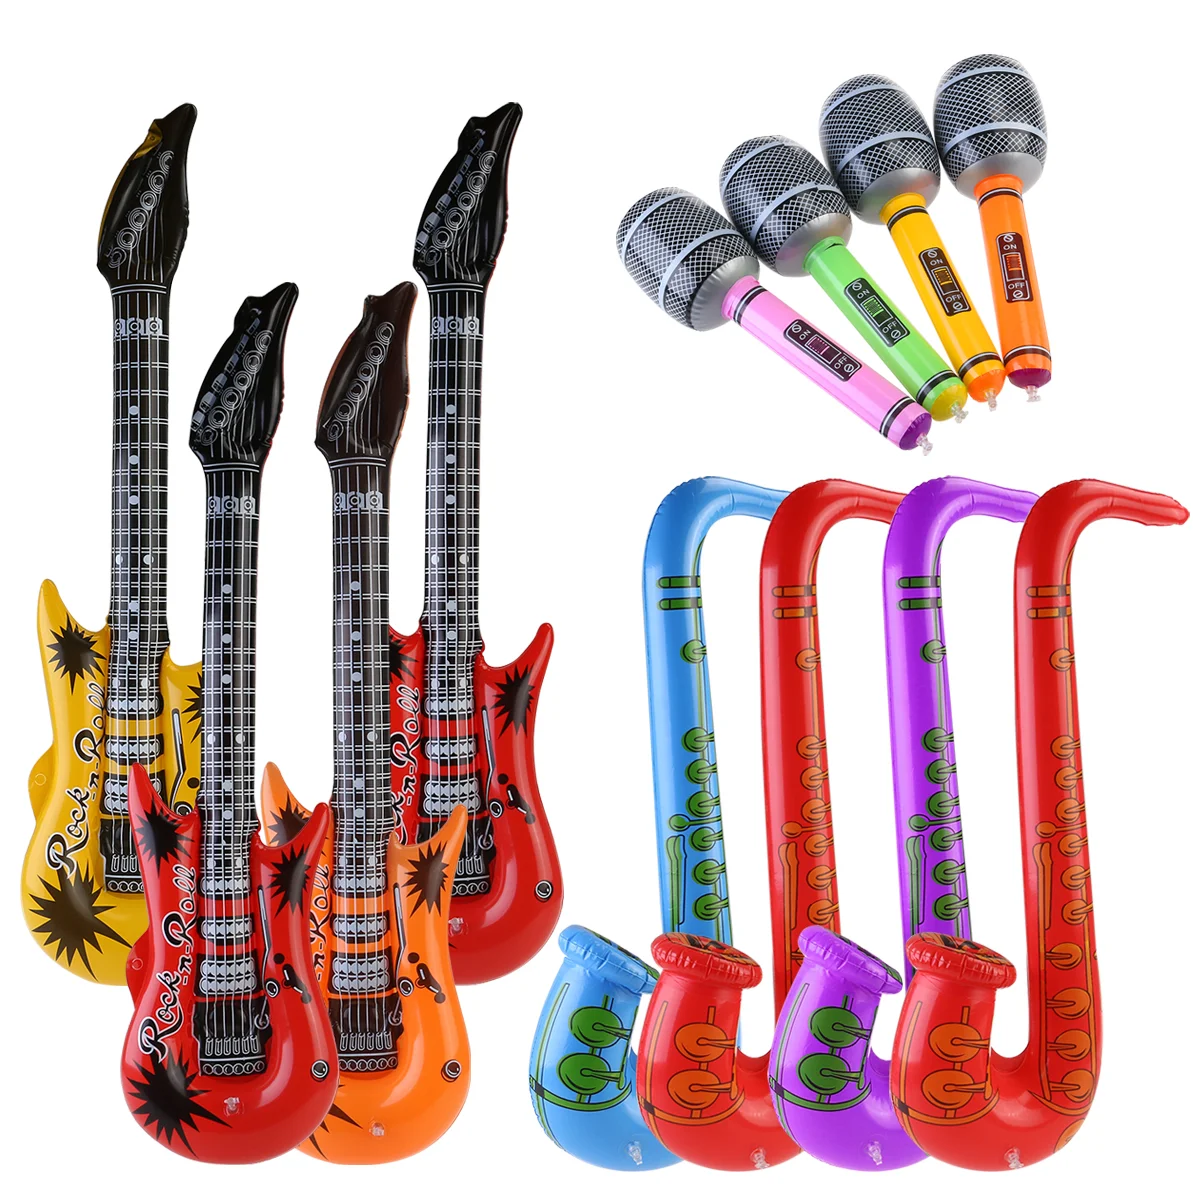 

Guitar Inflatable Balloon Balloons Party Mylar Blow Upguitars Birthday Prop Foil Instrument Wedding Instruments Play Favors